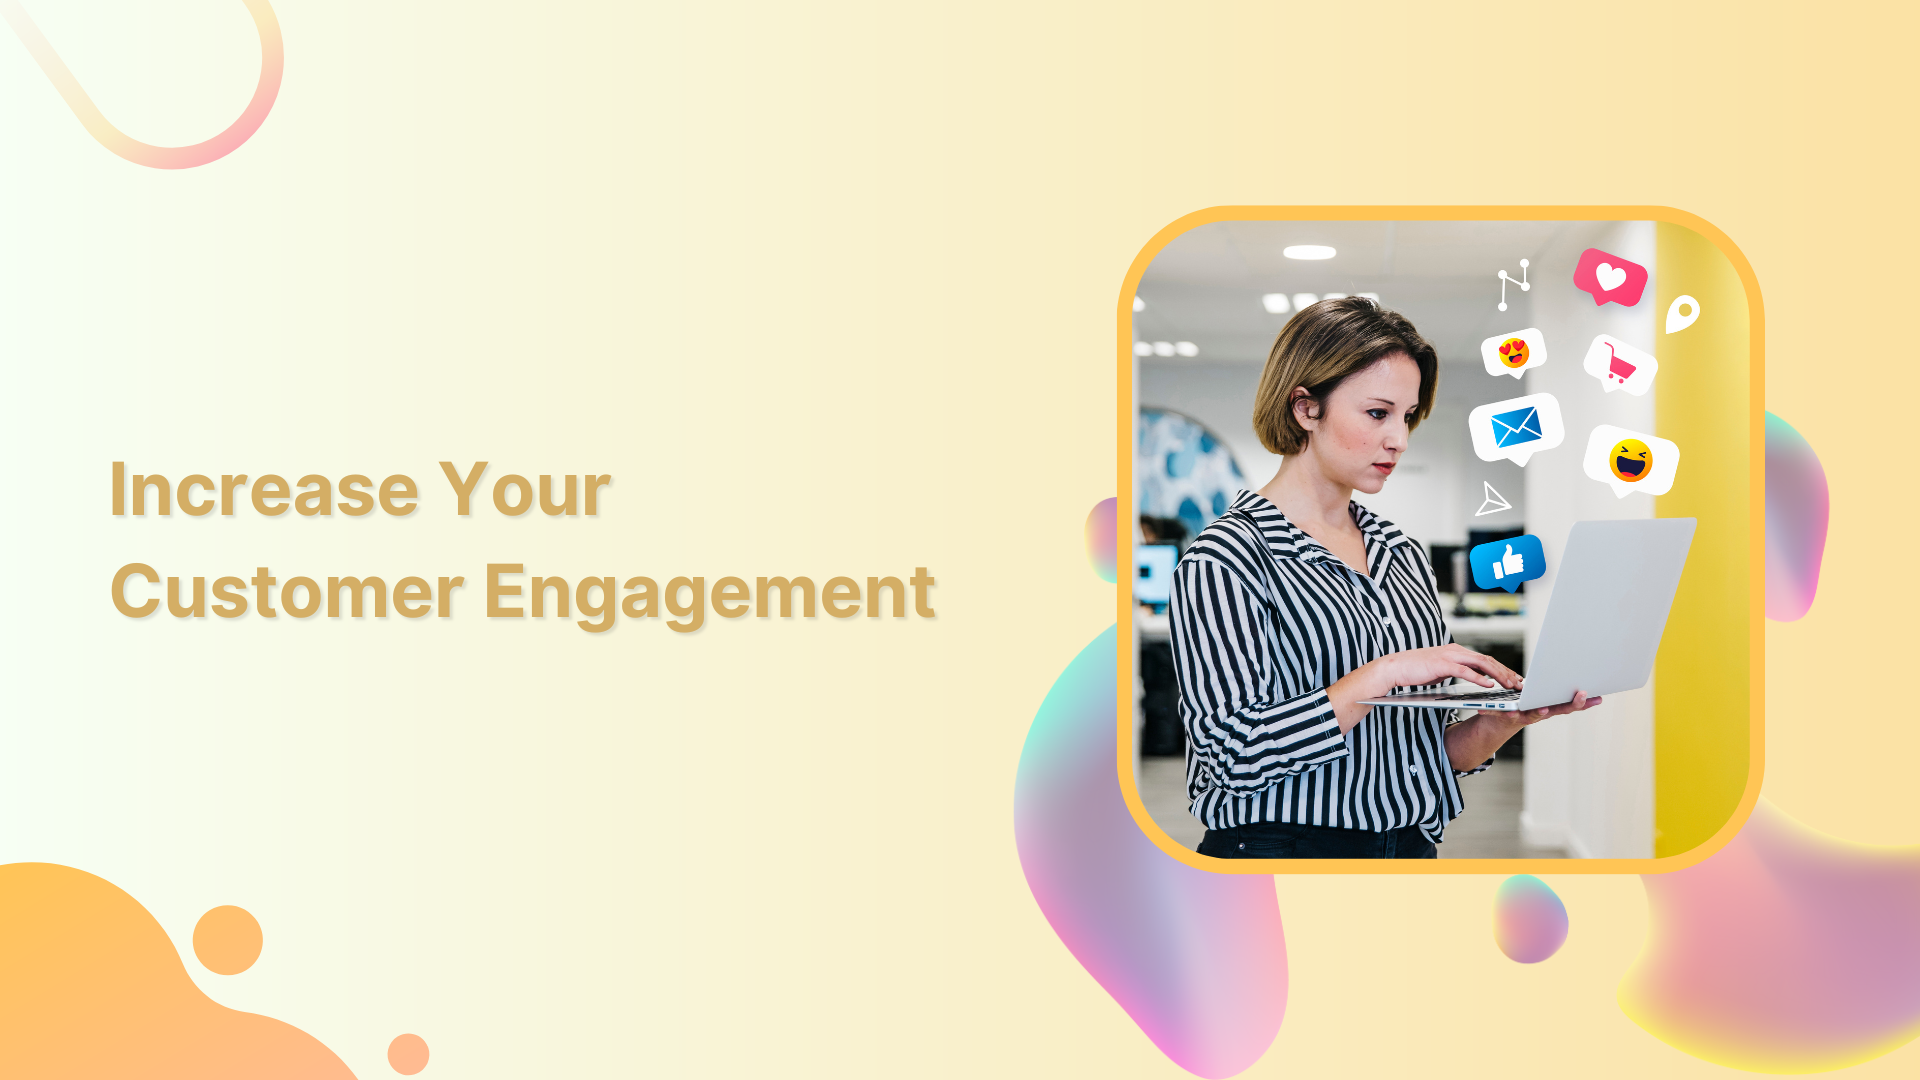 12 Strategies to Increase Your Customer Engagement